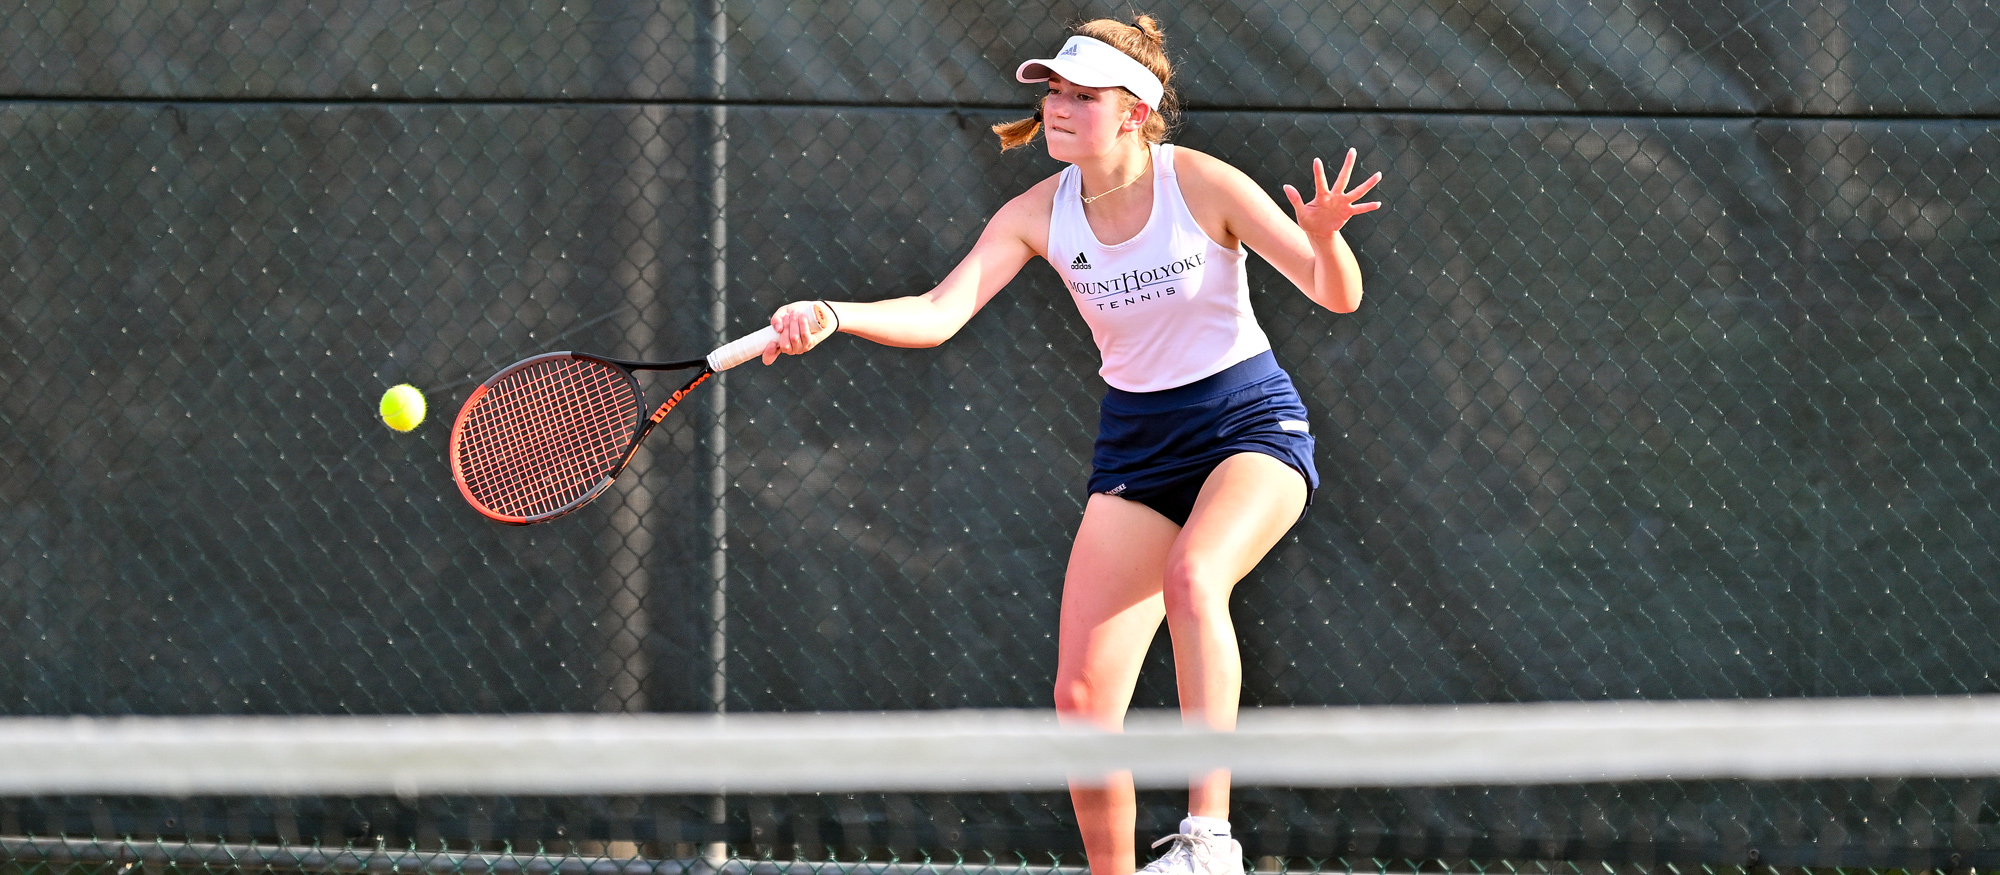 Kate Vavra won a point for Mount Holyoke with a third-set tiebreaker win at fifth singles against Connecticut College on March 22, 2023. (RJB Sports file photo)